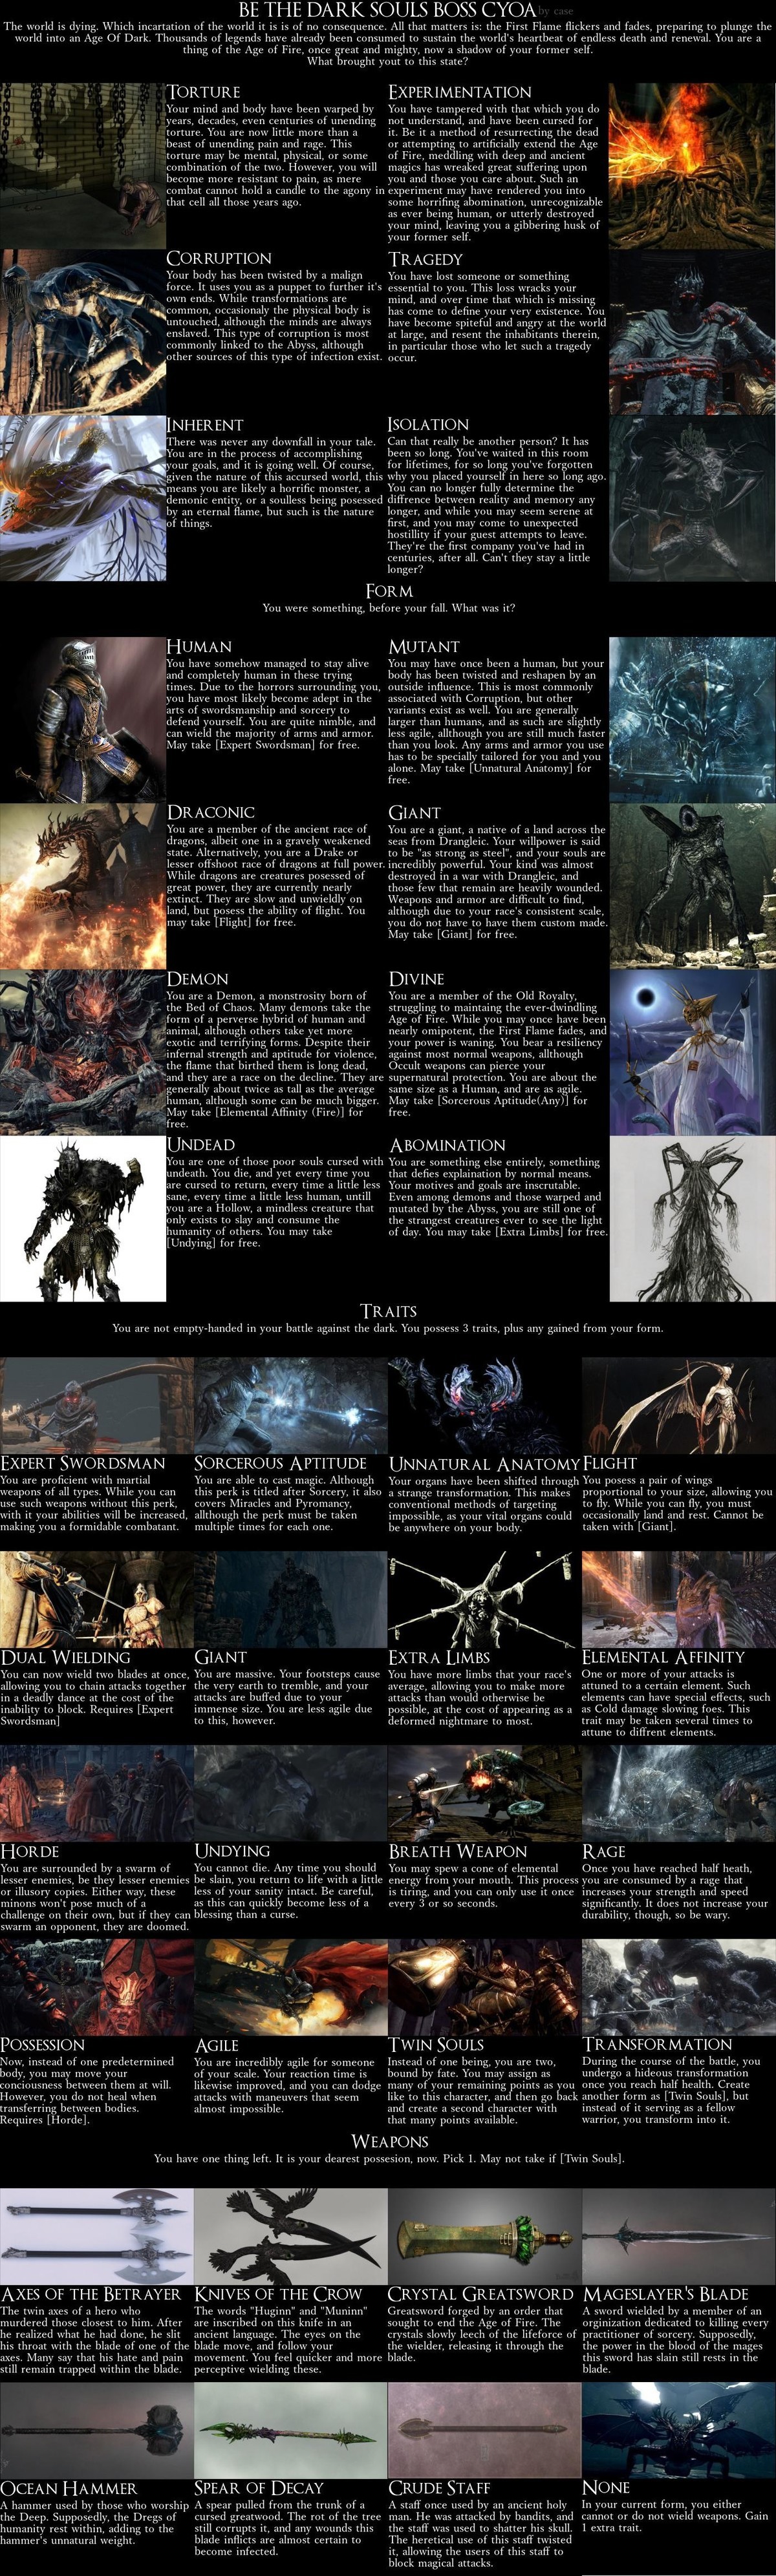 Be The Dark Souls Boss CYOA. Source join list: KnightWaifu (1004 subs)Mention History join list:. Tragedy Human (gain expert swordsman) Rage Agile Giant extra trait as zwei is life: Elemental Affinity - frost damage to hurt stamina